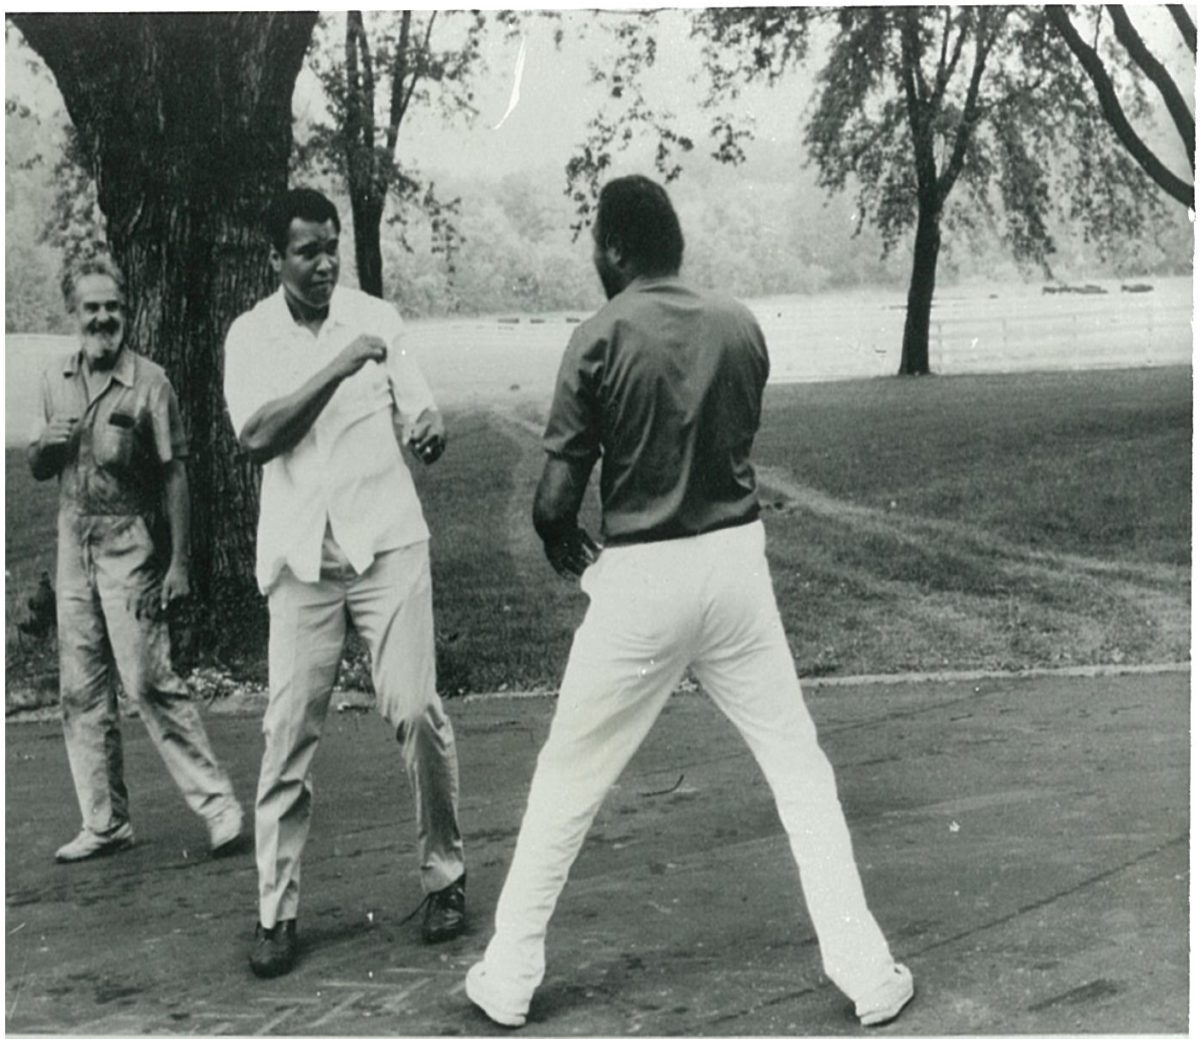 Muhammad Ali in an outdoor fighting stance. Photo courtesy Davis Miller from his book 'Approaching Ali'